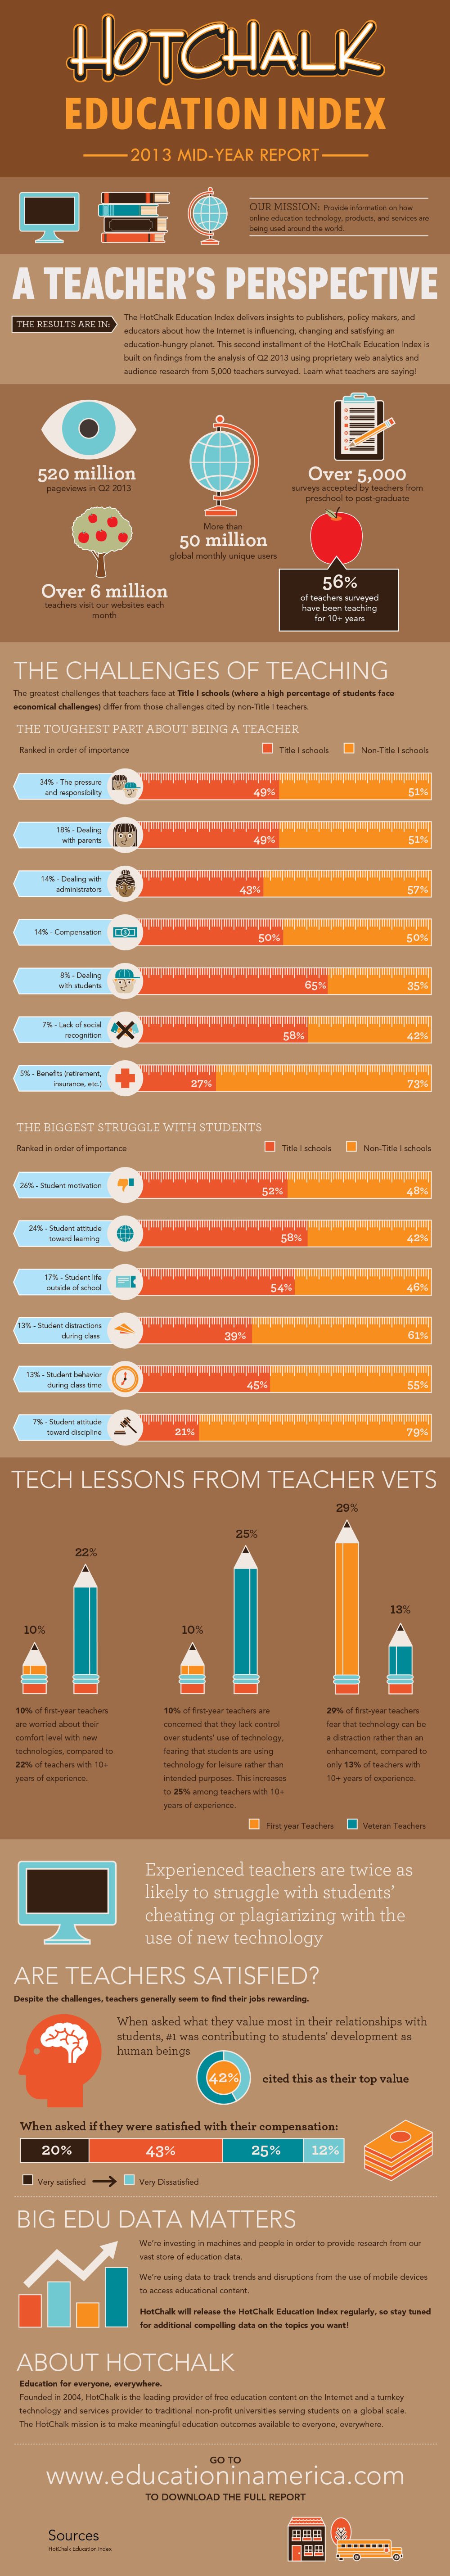 Education Index Infographic: Online Education vs. Traditional Education